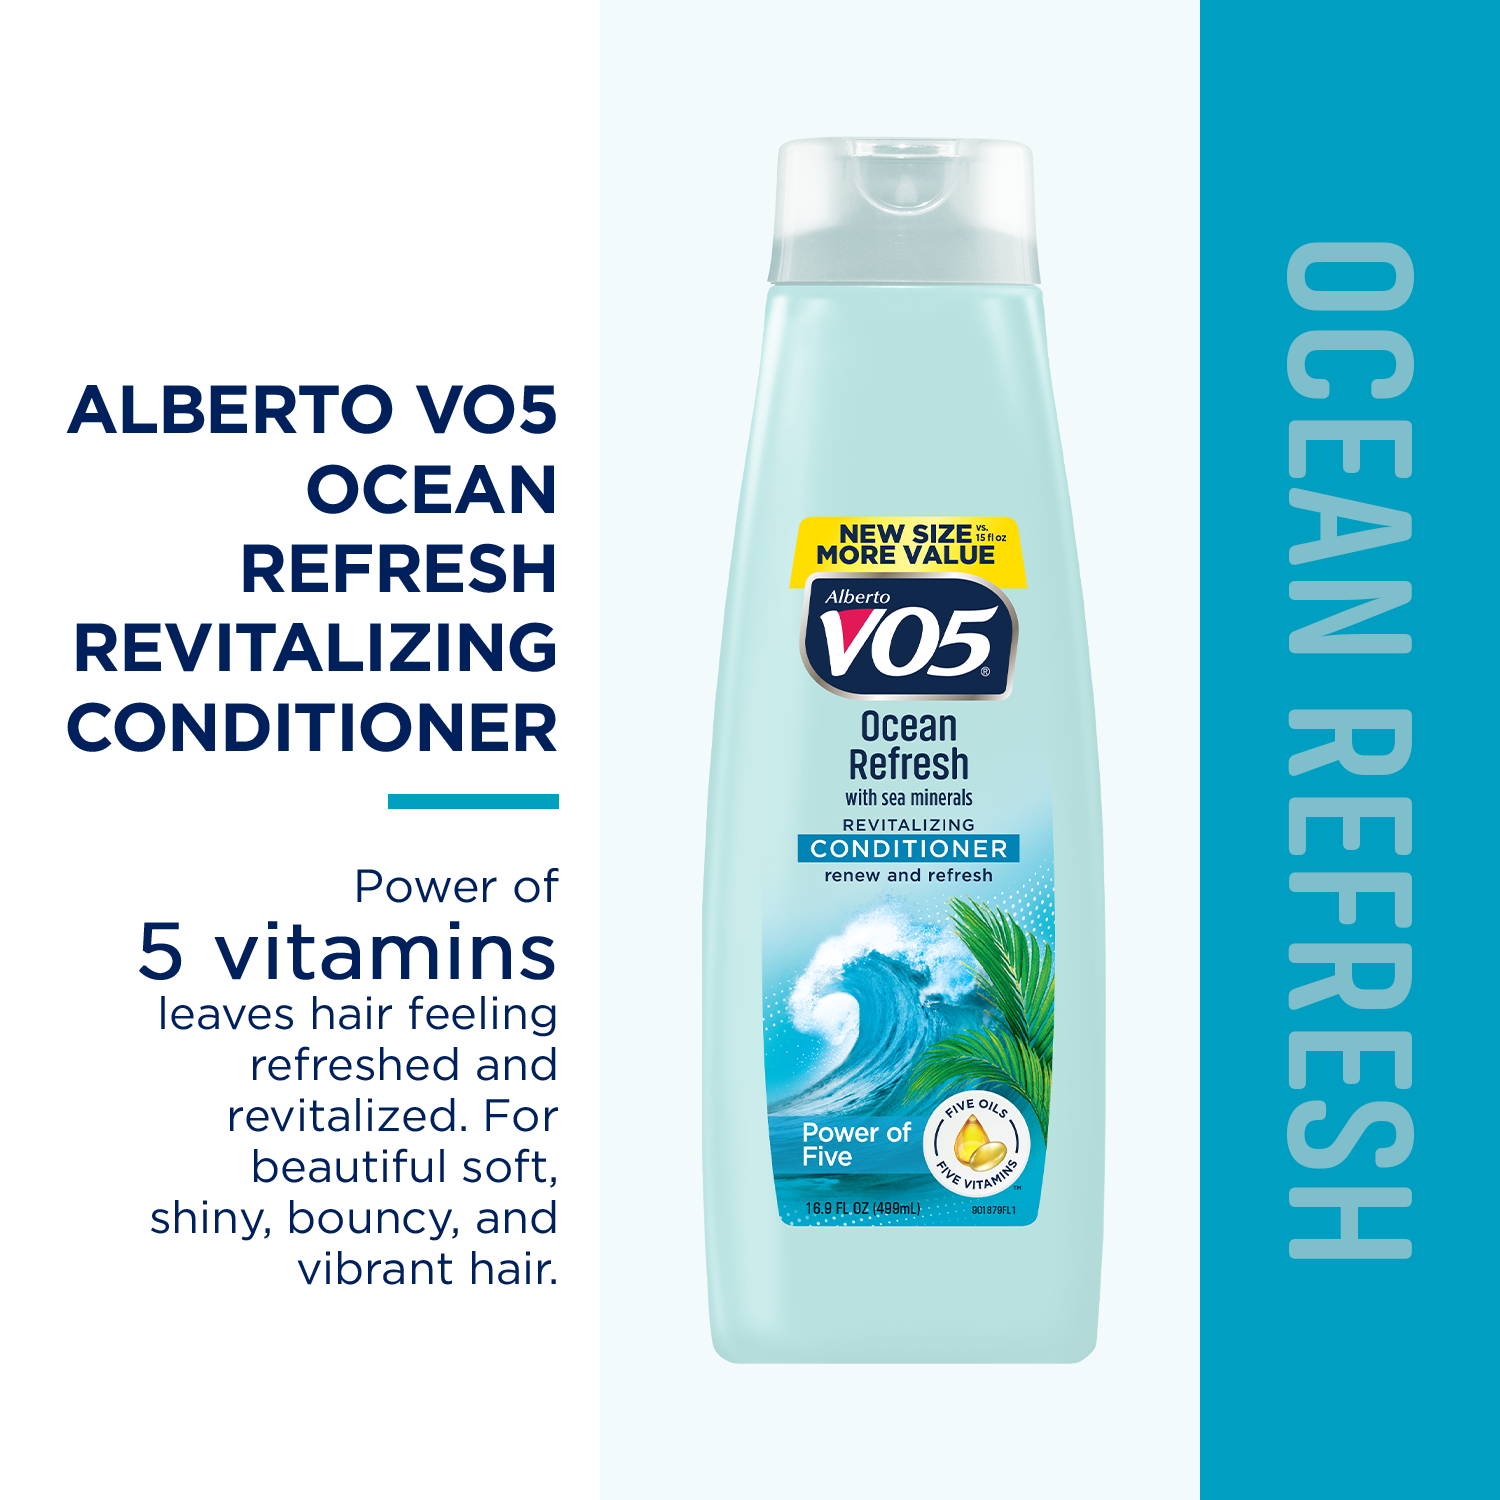 Alberto VO5 Ocean Refresh Revitalizing Conditioner with Sea Minerals, for All Hair Types, 16.9 fl oz - image 3 of 6